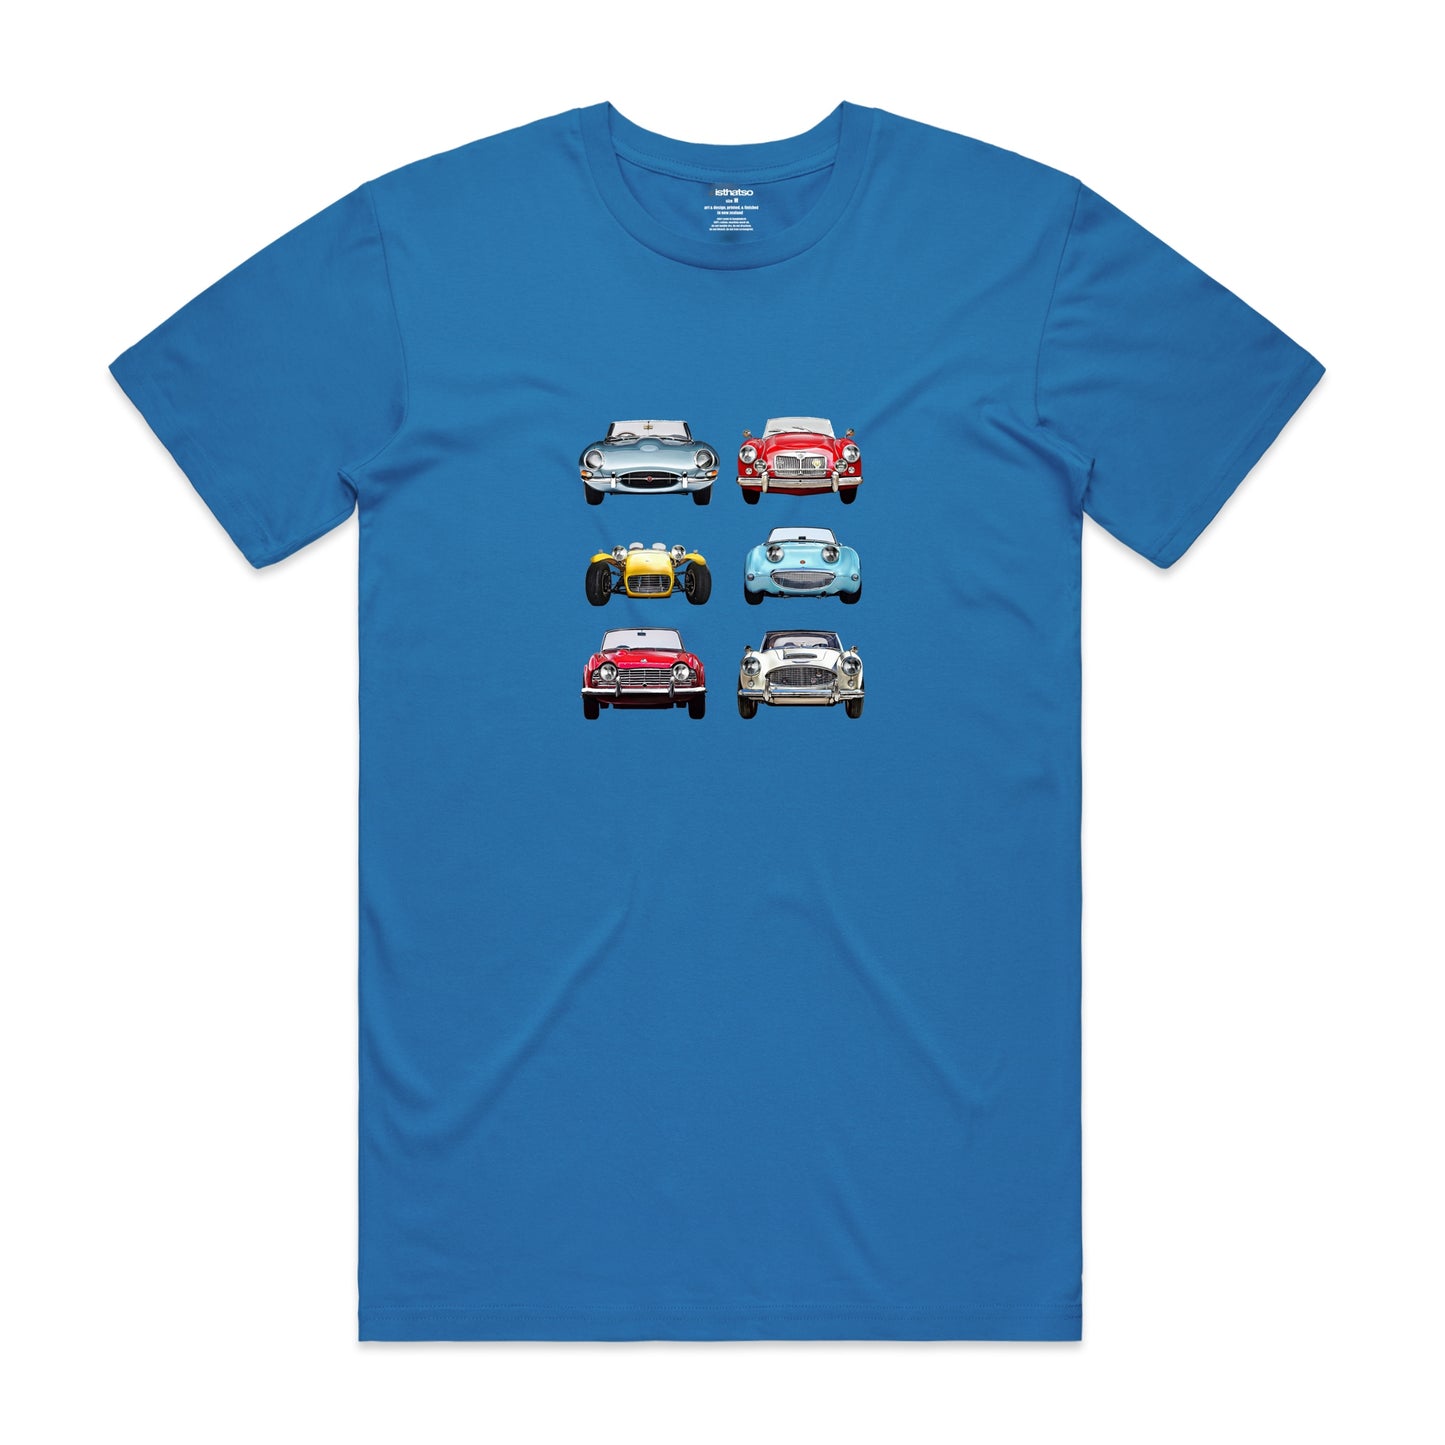 Isthatso Cotton Graphic T Shirt - UK Classic Cars - Blue